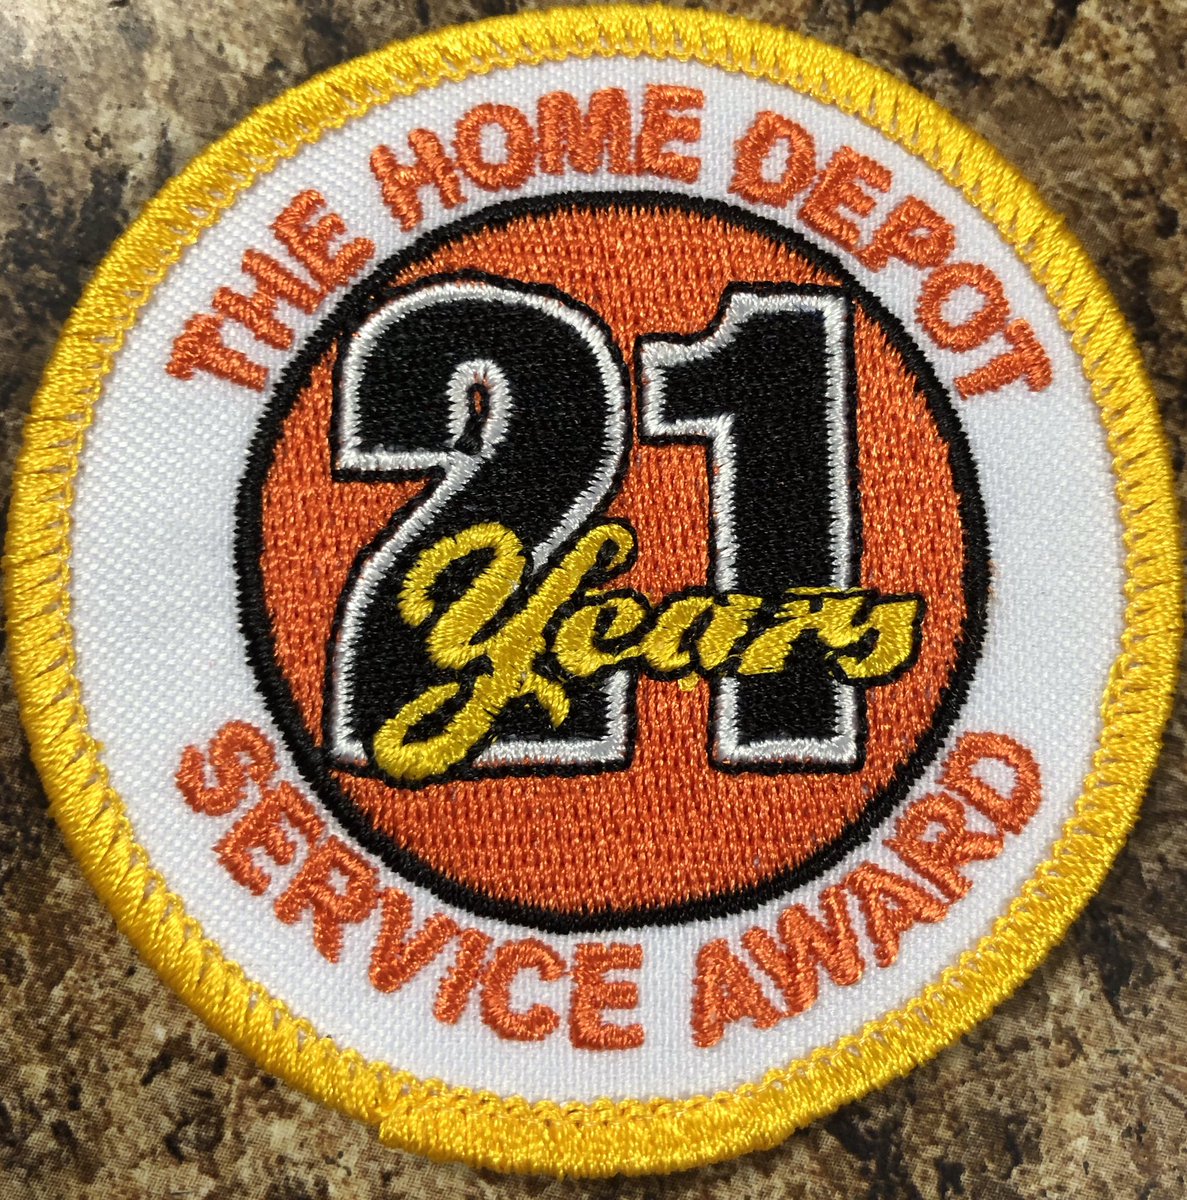 21 years ago , I embarked on this incredible journey. I am beyond proud and eternally grateful to have the opportunity to serve my associates and customers daily. Thank you to all of the great leaders and associates I’ve encountered along the way. #bleedingorange